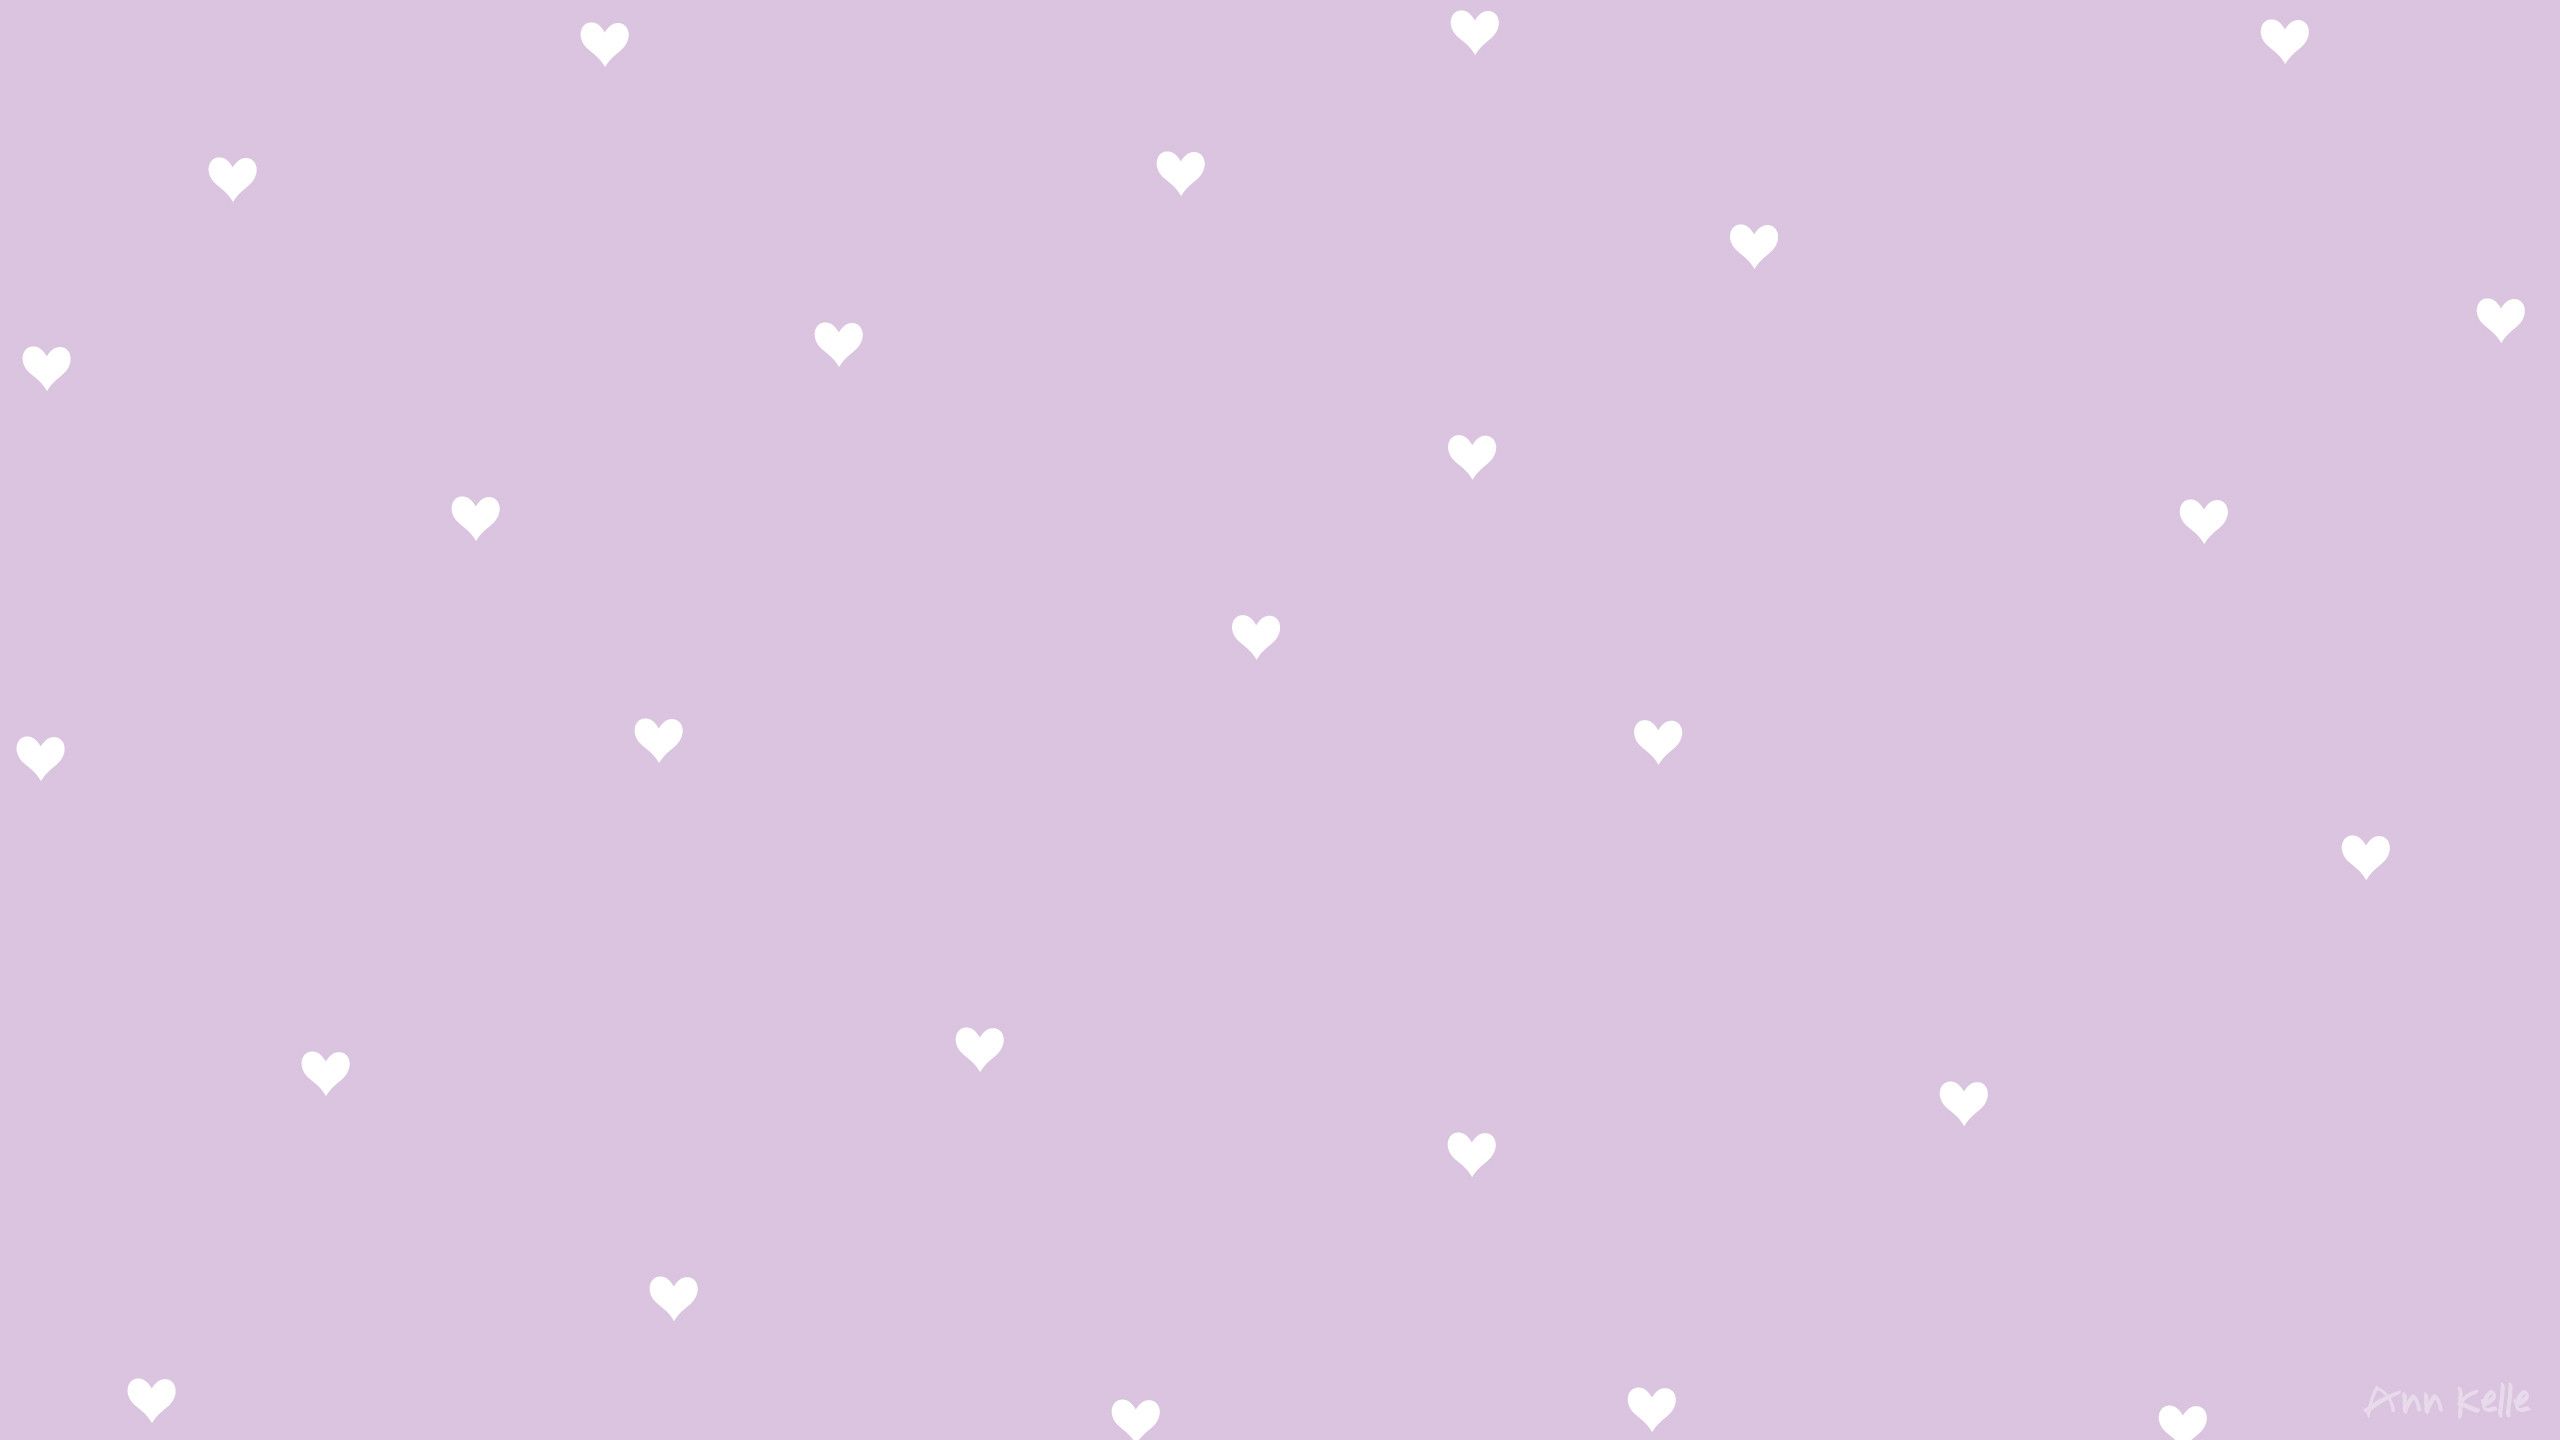 A pink and white heart pattern wallpaper for desktop, phone, or tablet - Heart, pastel purple, light purple, 2560x1440